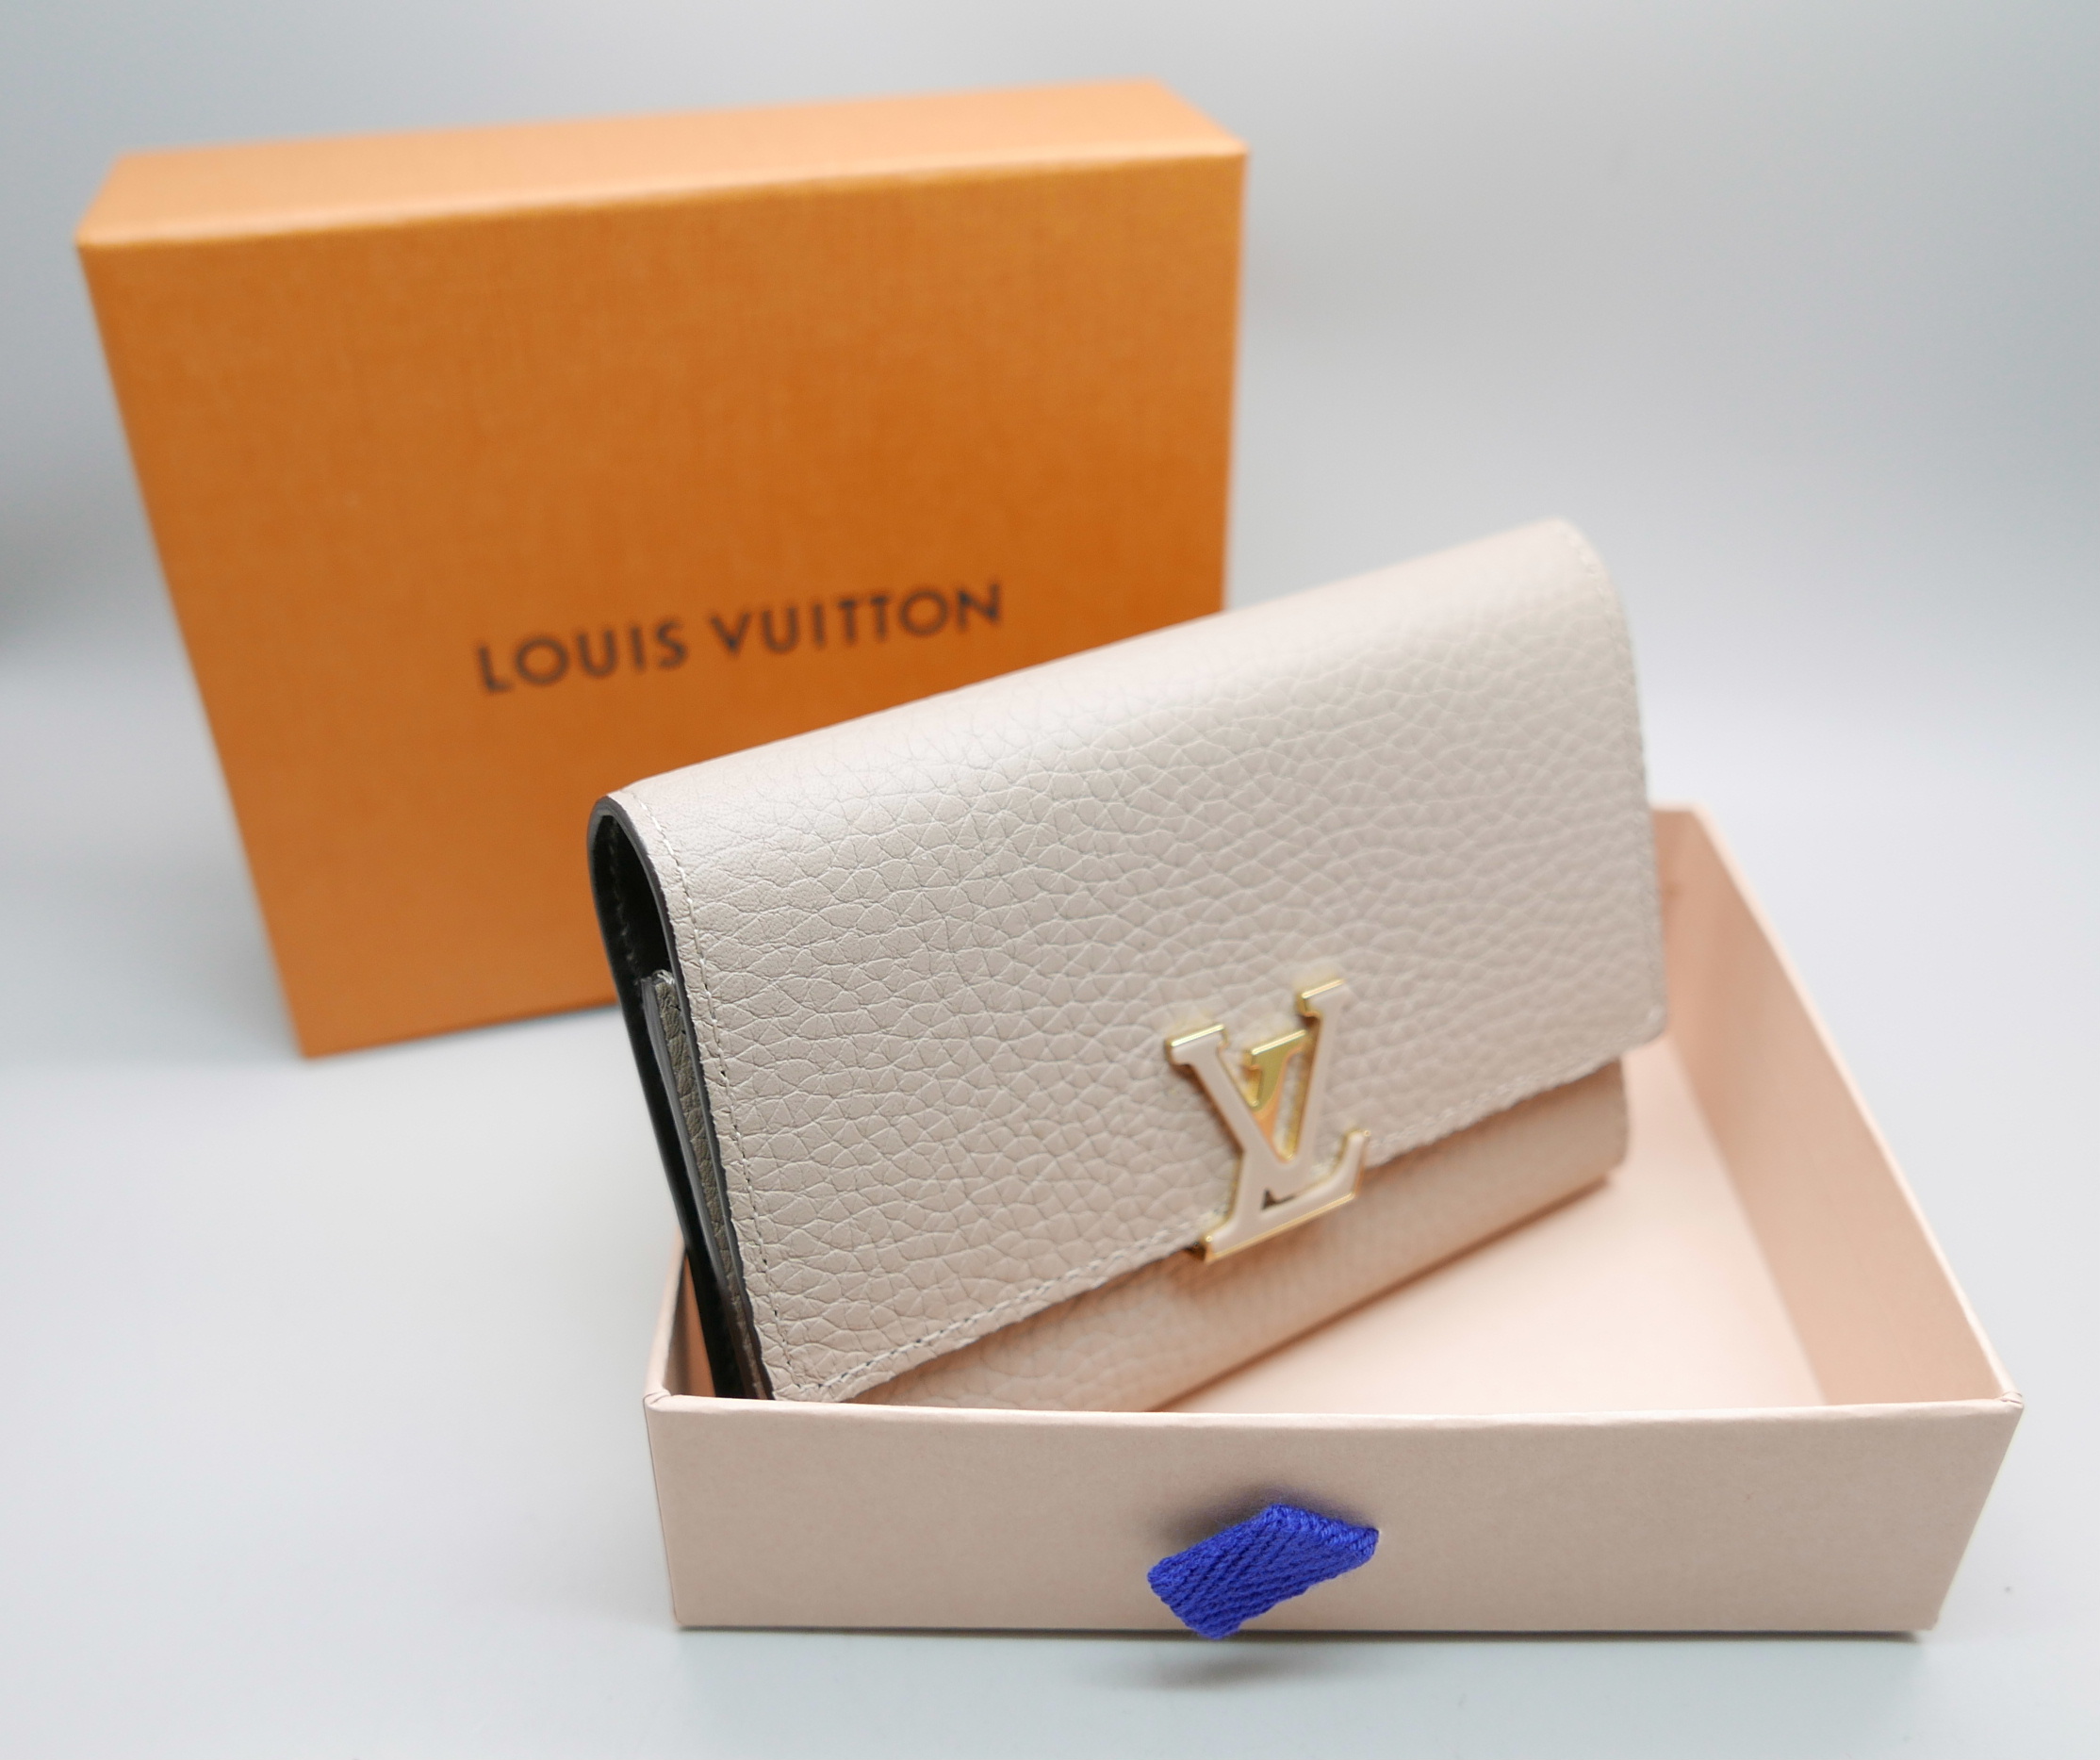 A lady's Louis Vuitton purse, boxed - Image 4 of 4